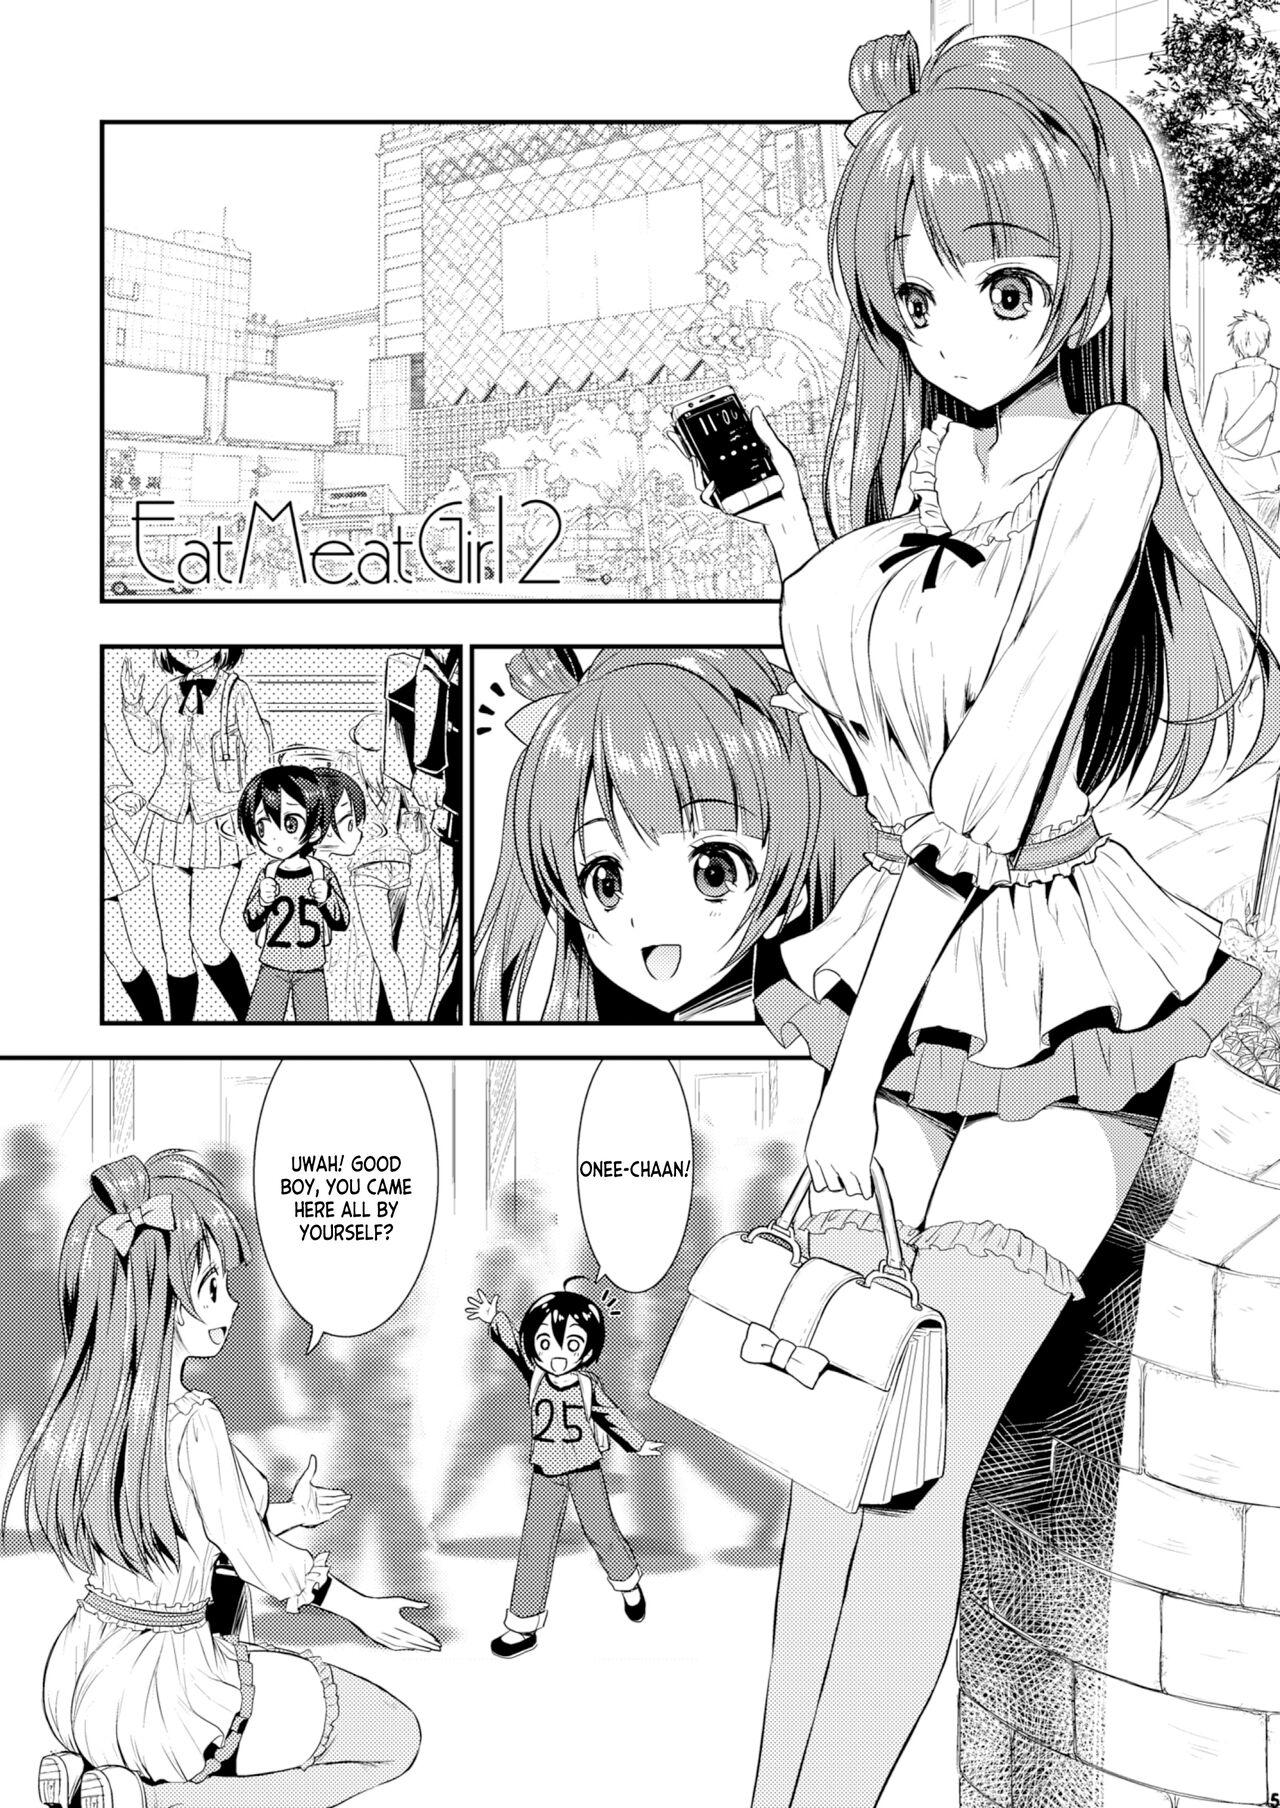 Scissoring Eat Meat Girl 2 - Love live Amadora - Page 5